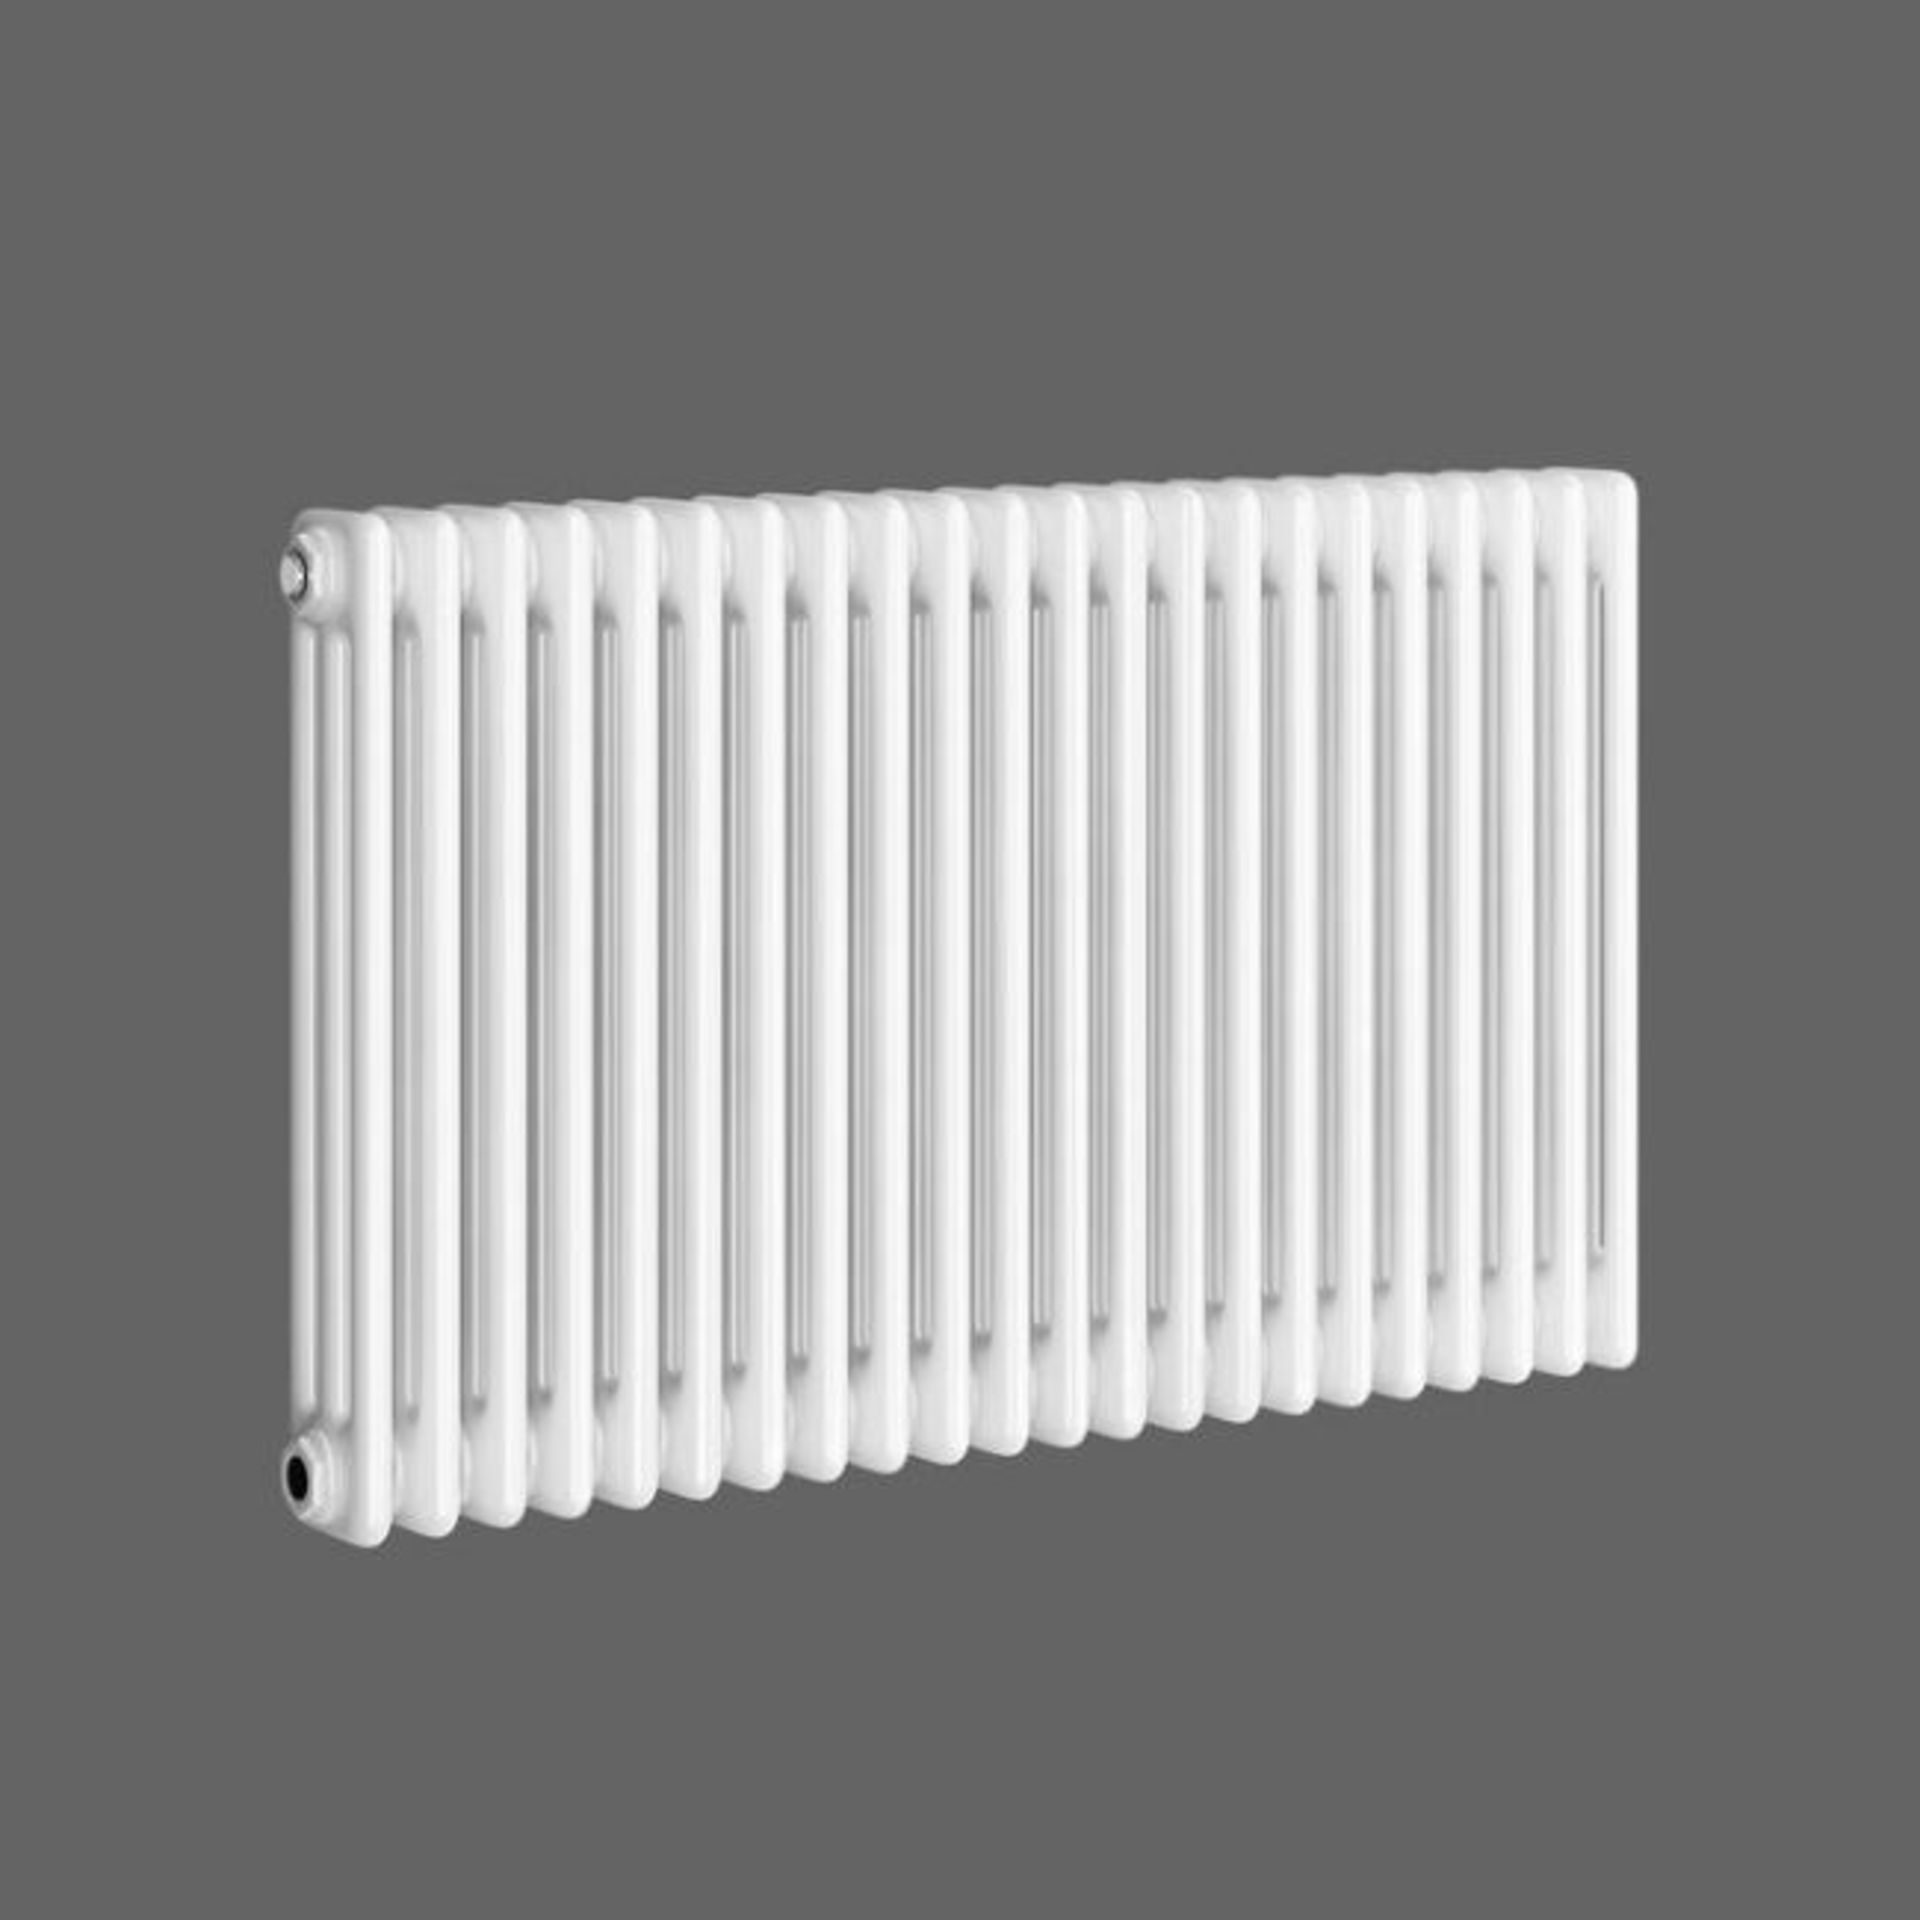 New (D40) 600x812mm White Double Panel Horizontal Colosseum Traditional Radiator.Rrp £441.99.M...